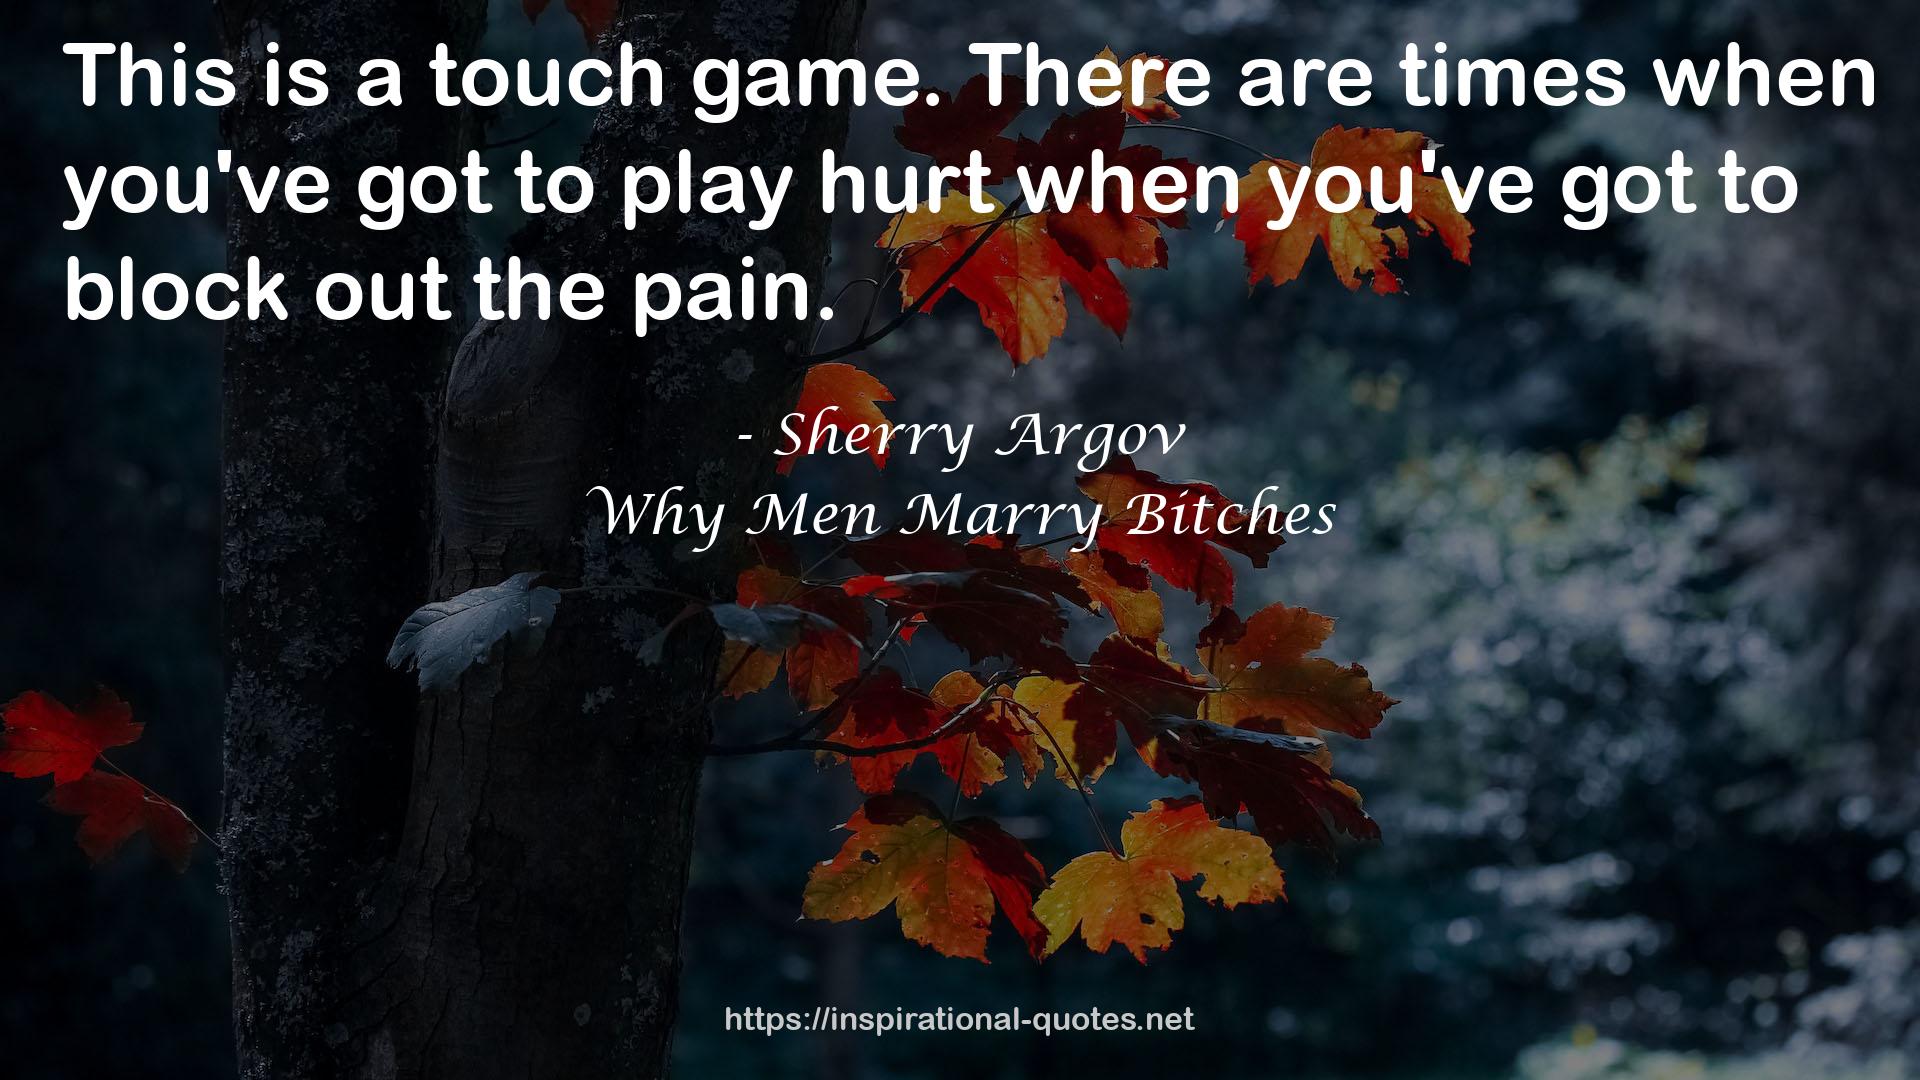 Why Men Marry Bitches QUOTES